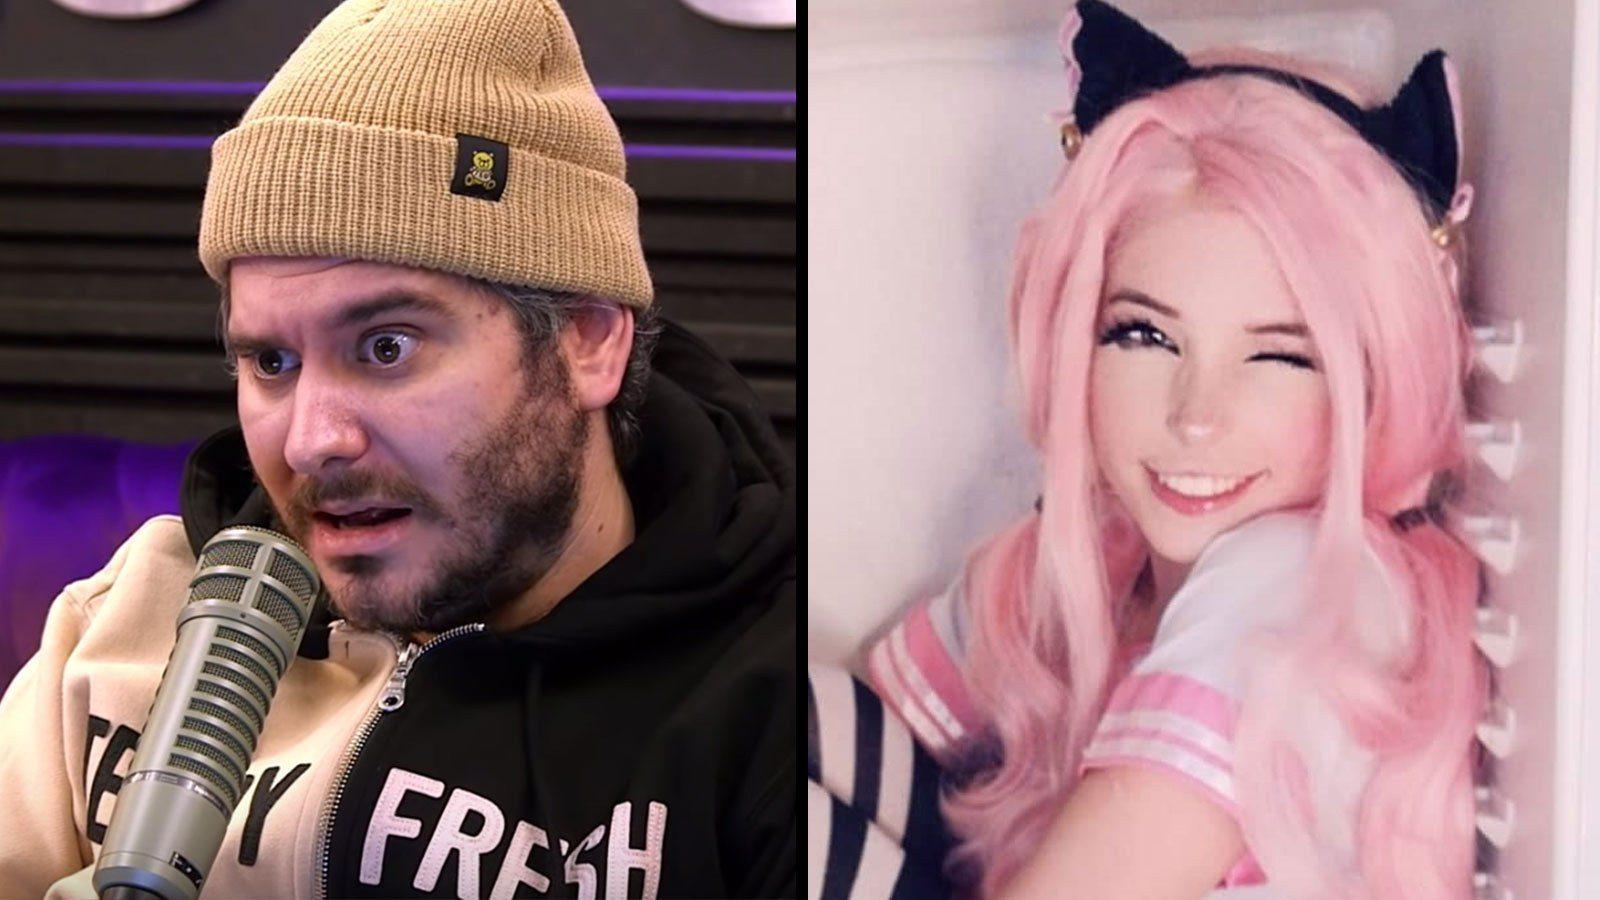 H3 Podcast Twitch Double Standard & Analyzing Belle Delphine's Spit ( Podcast Episode 2019) - IMDb